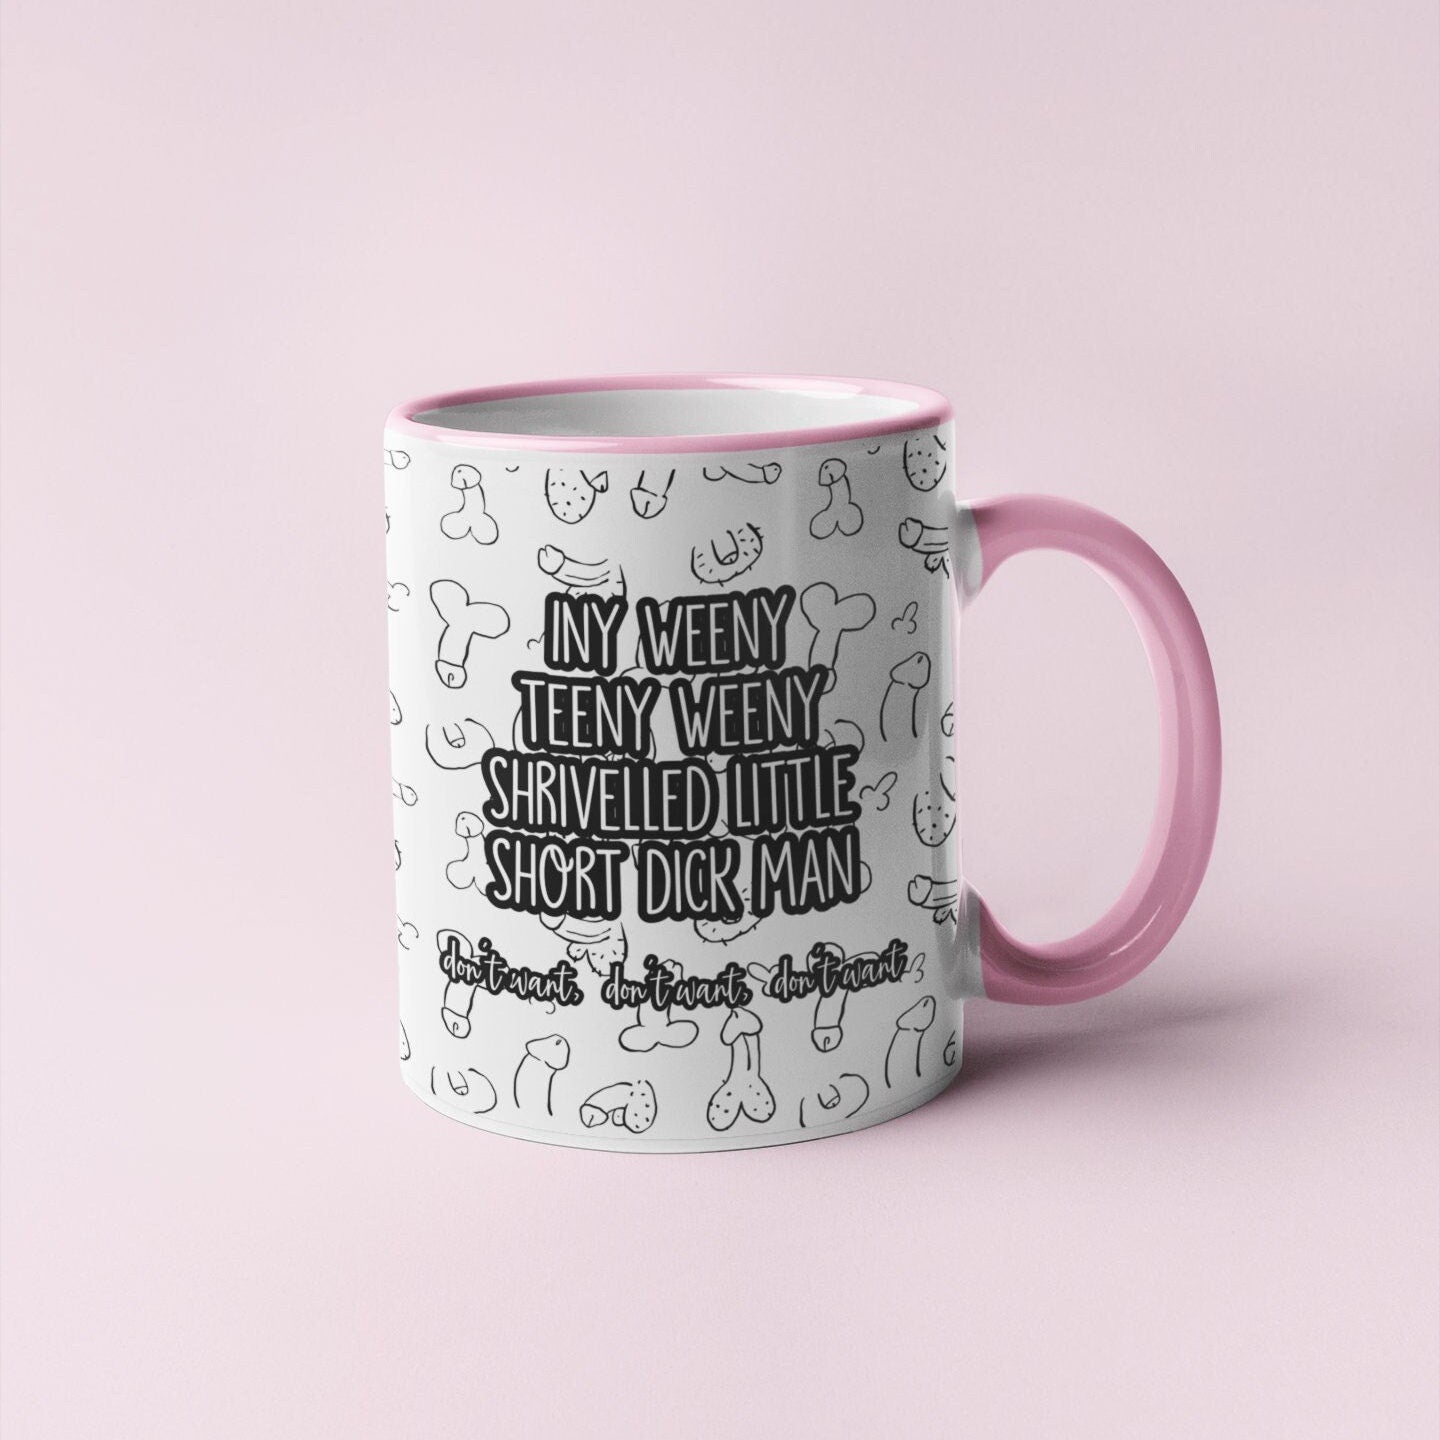 White mug with a pink handle and rim, with a funny willy design printed throughout. Over the print it reads iny weeny teeny weeny shrivelled little short dick man.. don't want, don't want, don't want.